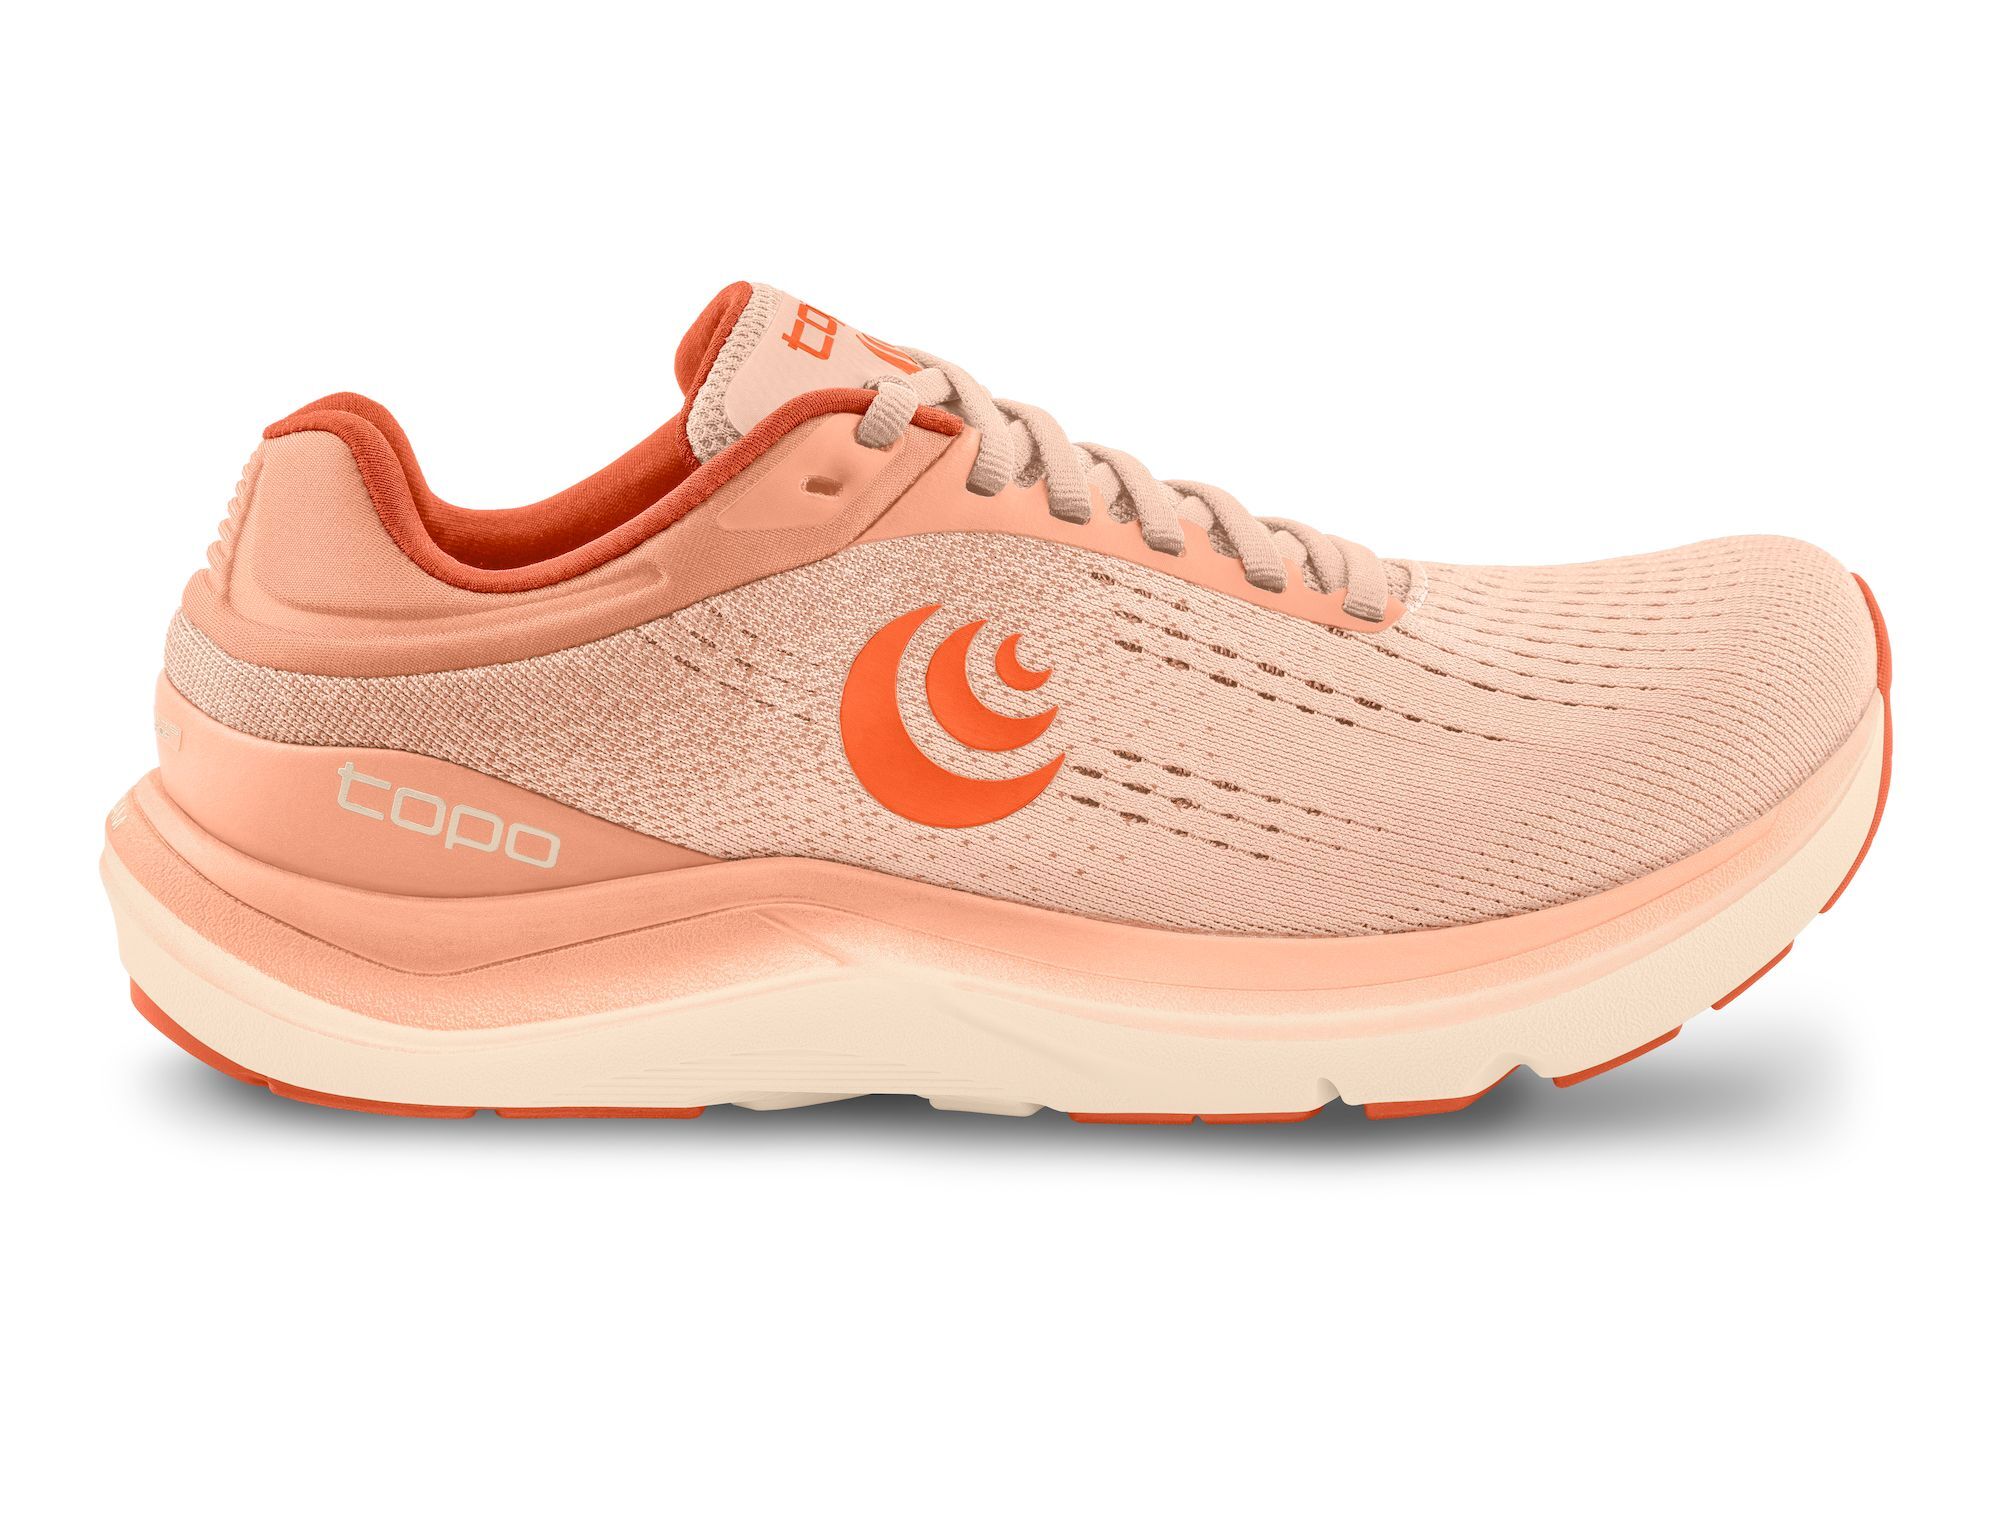 Topo Athletic Magnifly 5 - Chaussures running femme | Hardloop